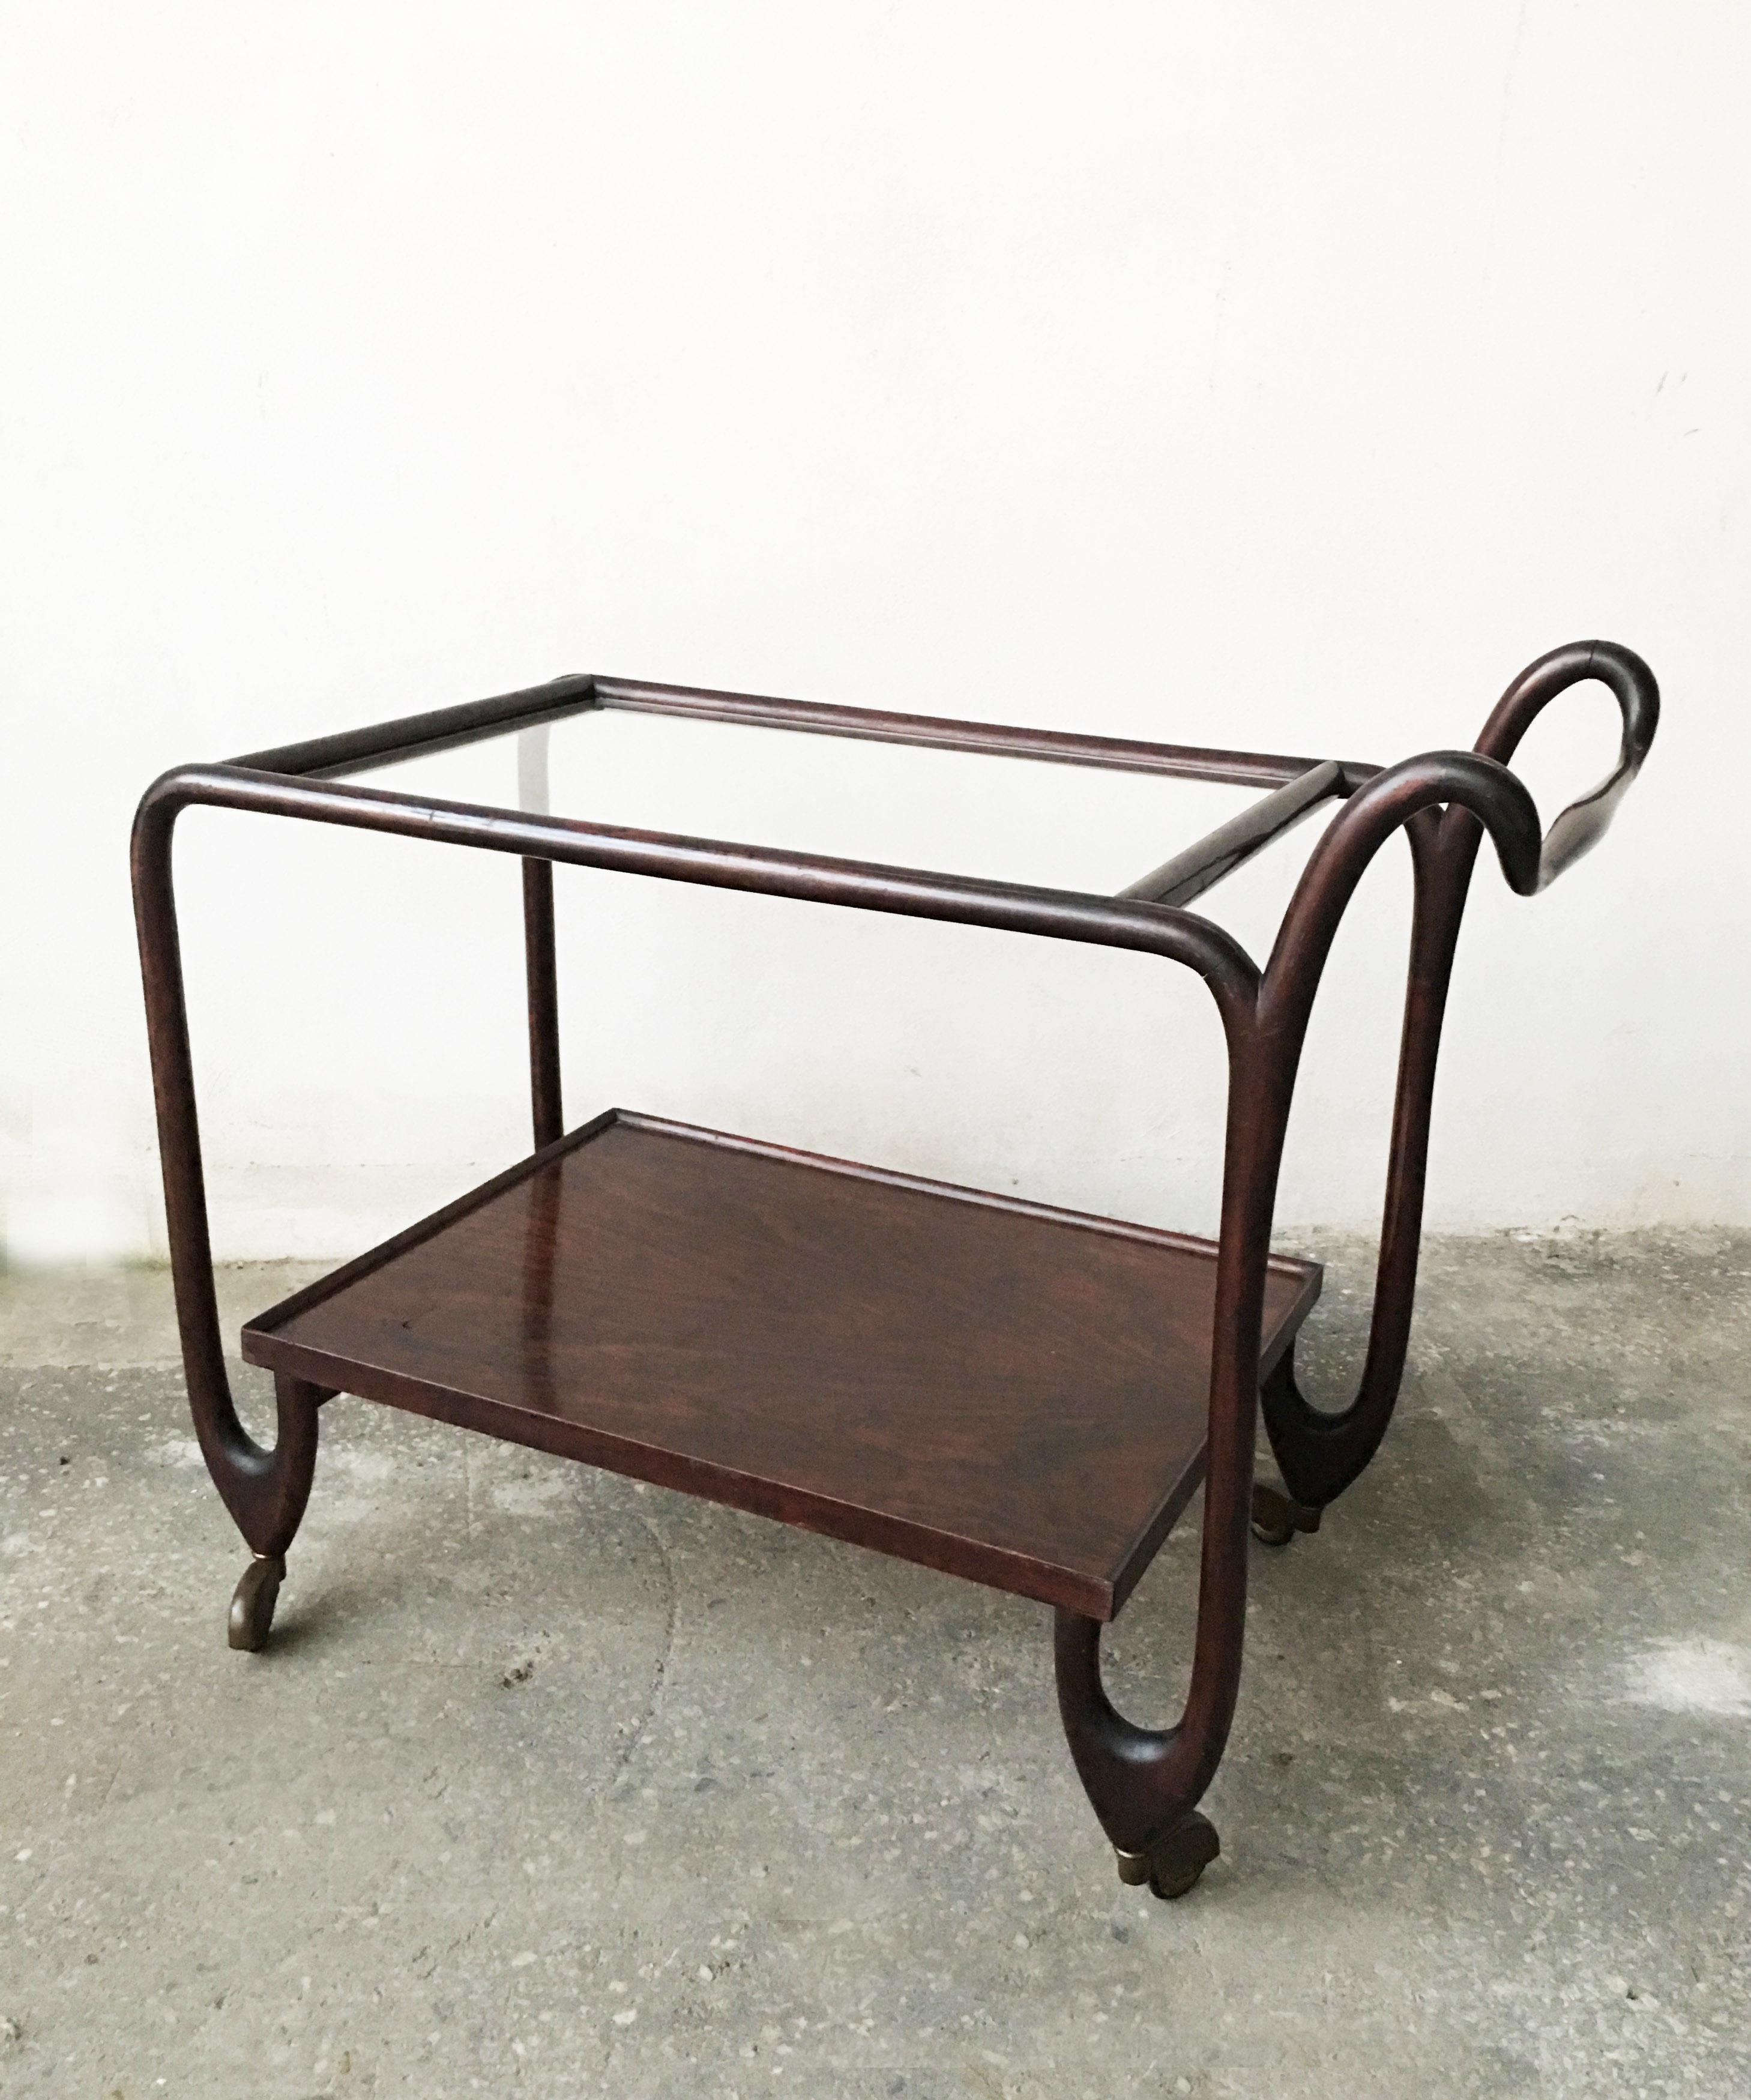 Amazing bar cart or trolley with curved mahogany with clear glass on top and four brass wheels.
All the shape remember some beautiful pieces designed by Giuseppe Scapinelli during his Brasilian period. The lower surface is in mahogany too.